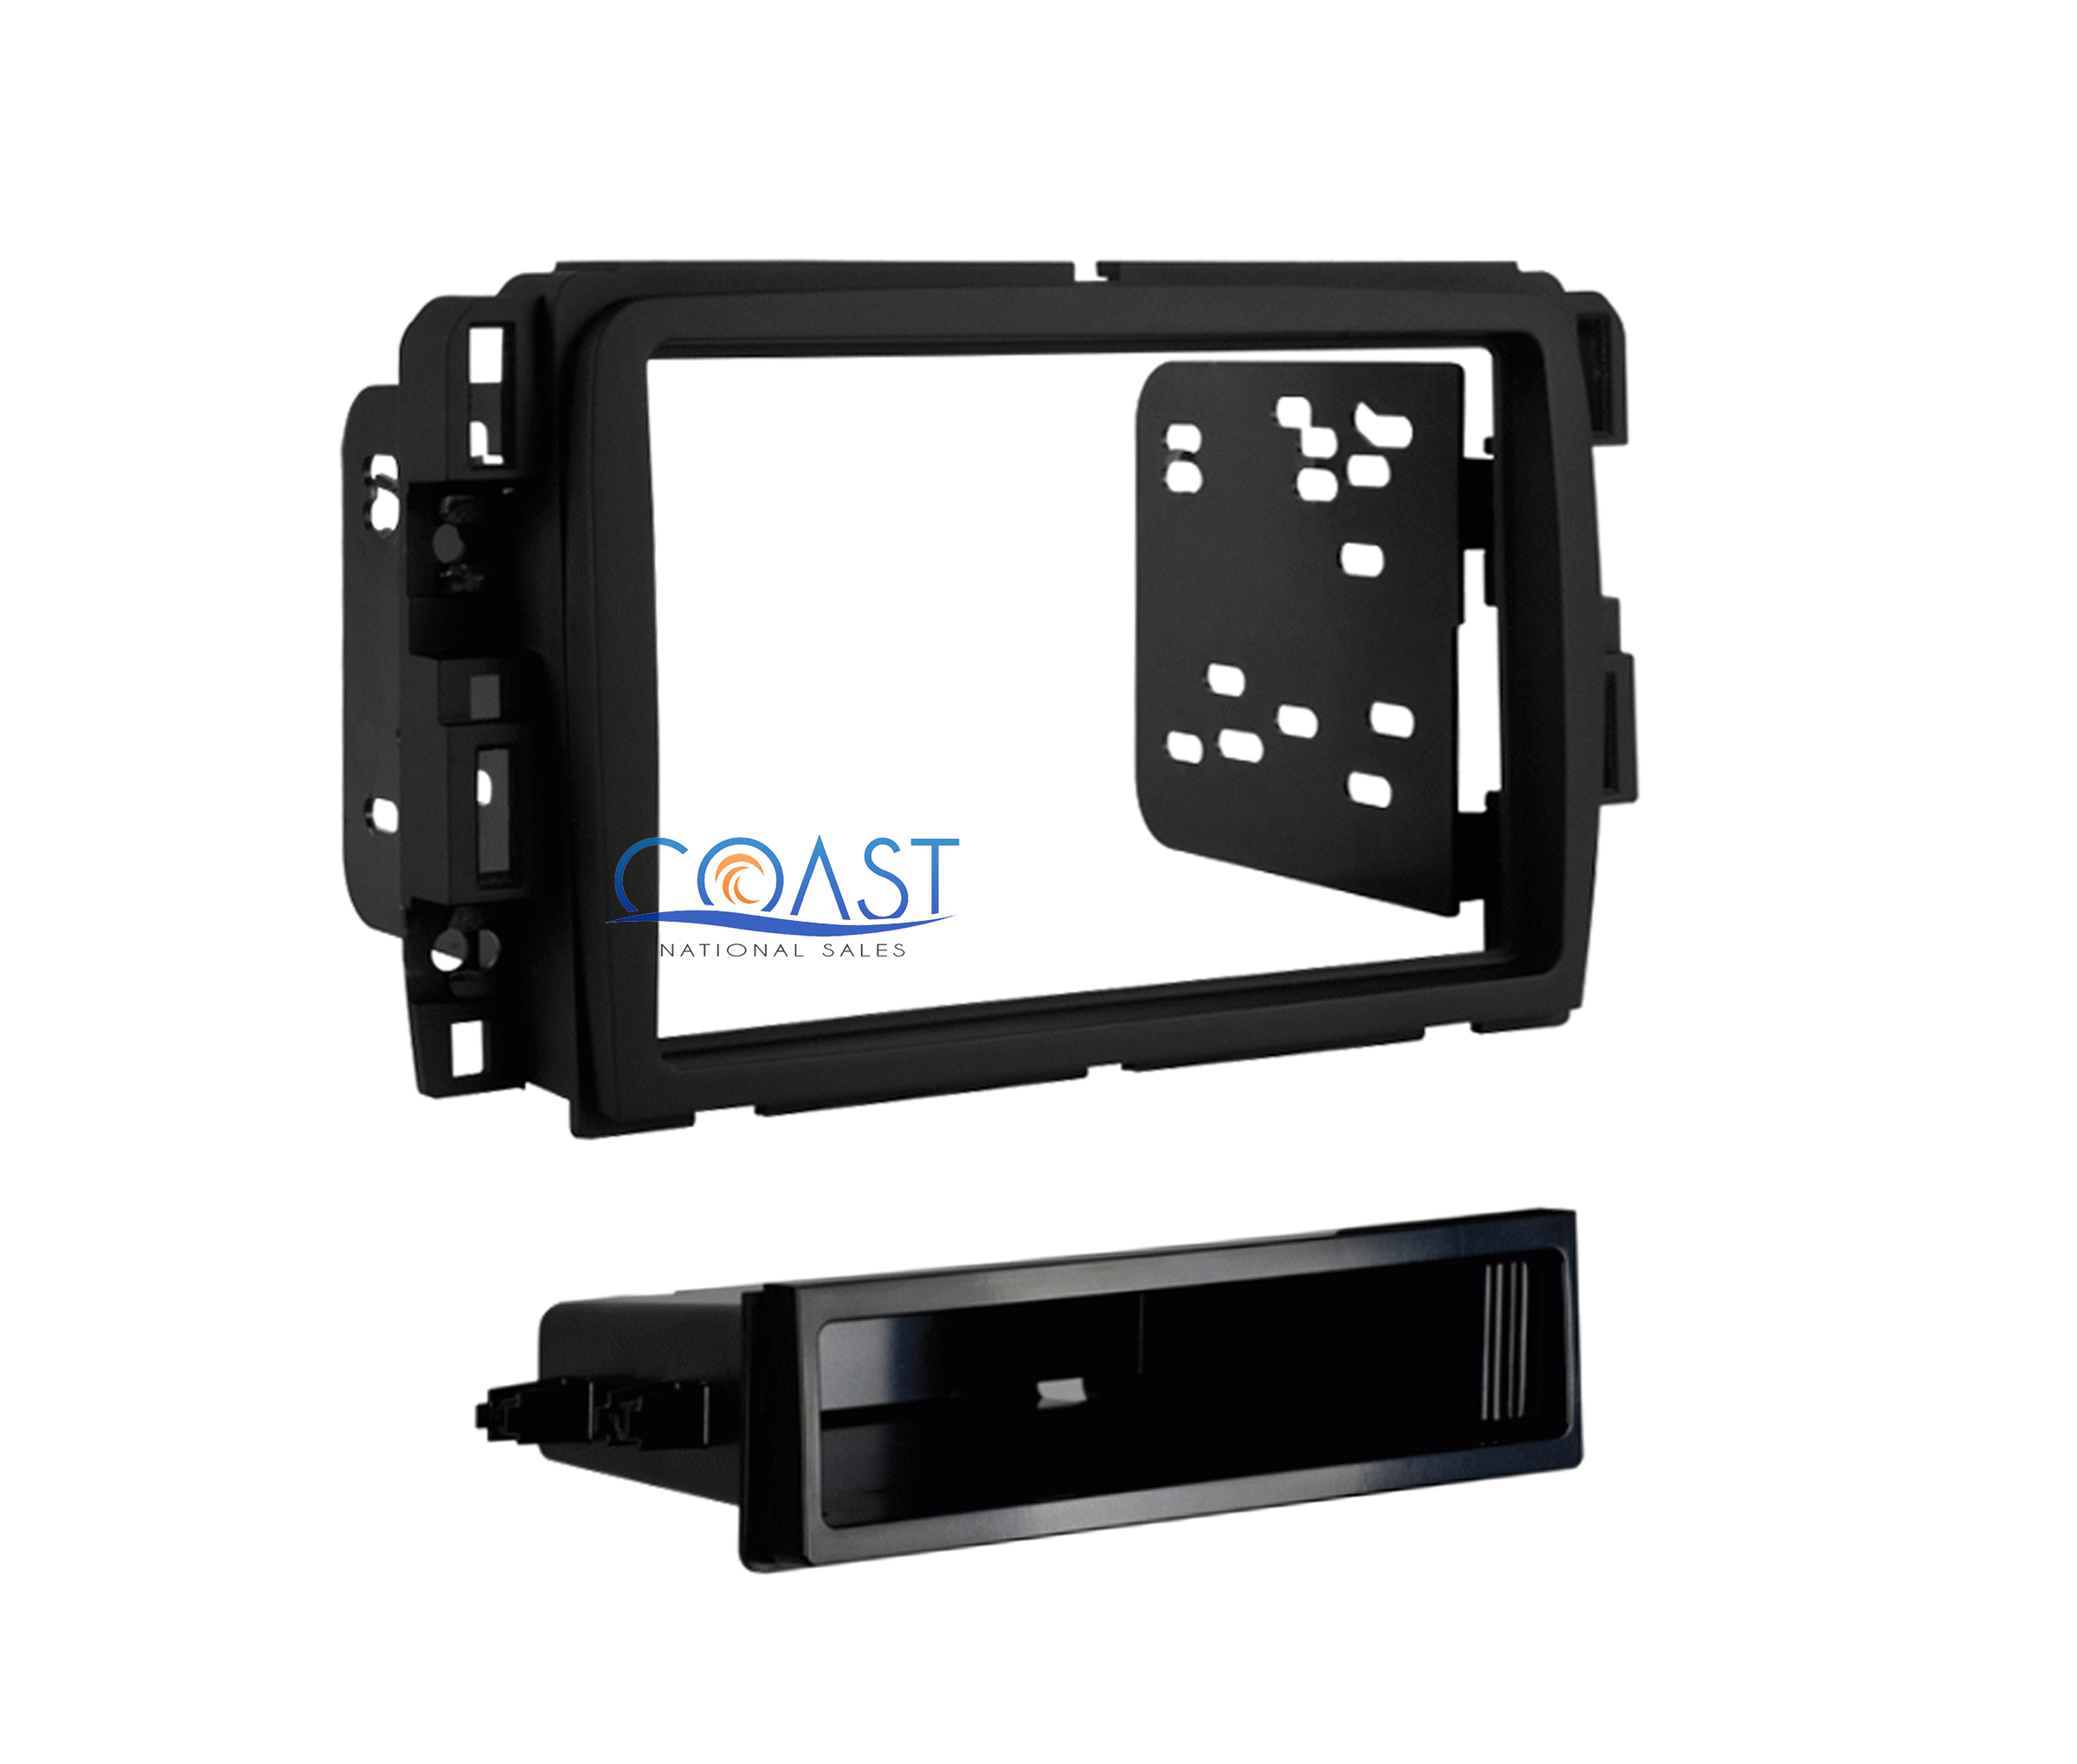 Metra 99 3310B Single DIN Install Dash Kit for select 2013 up GM Vehicles